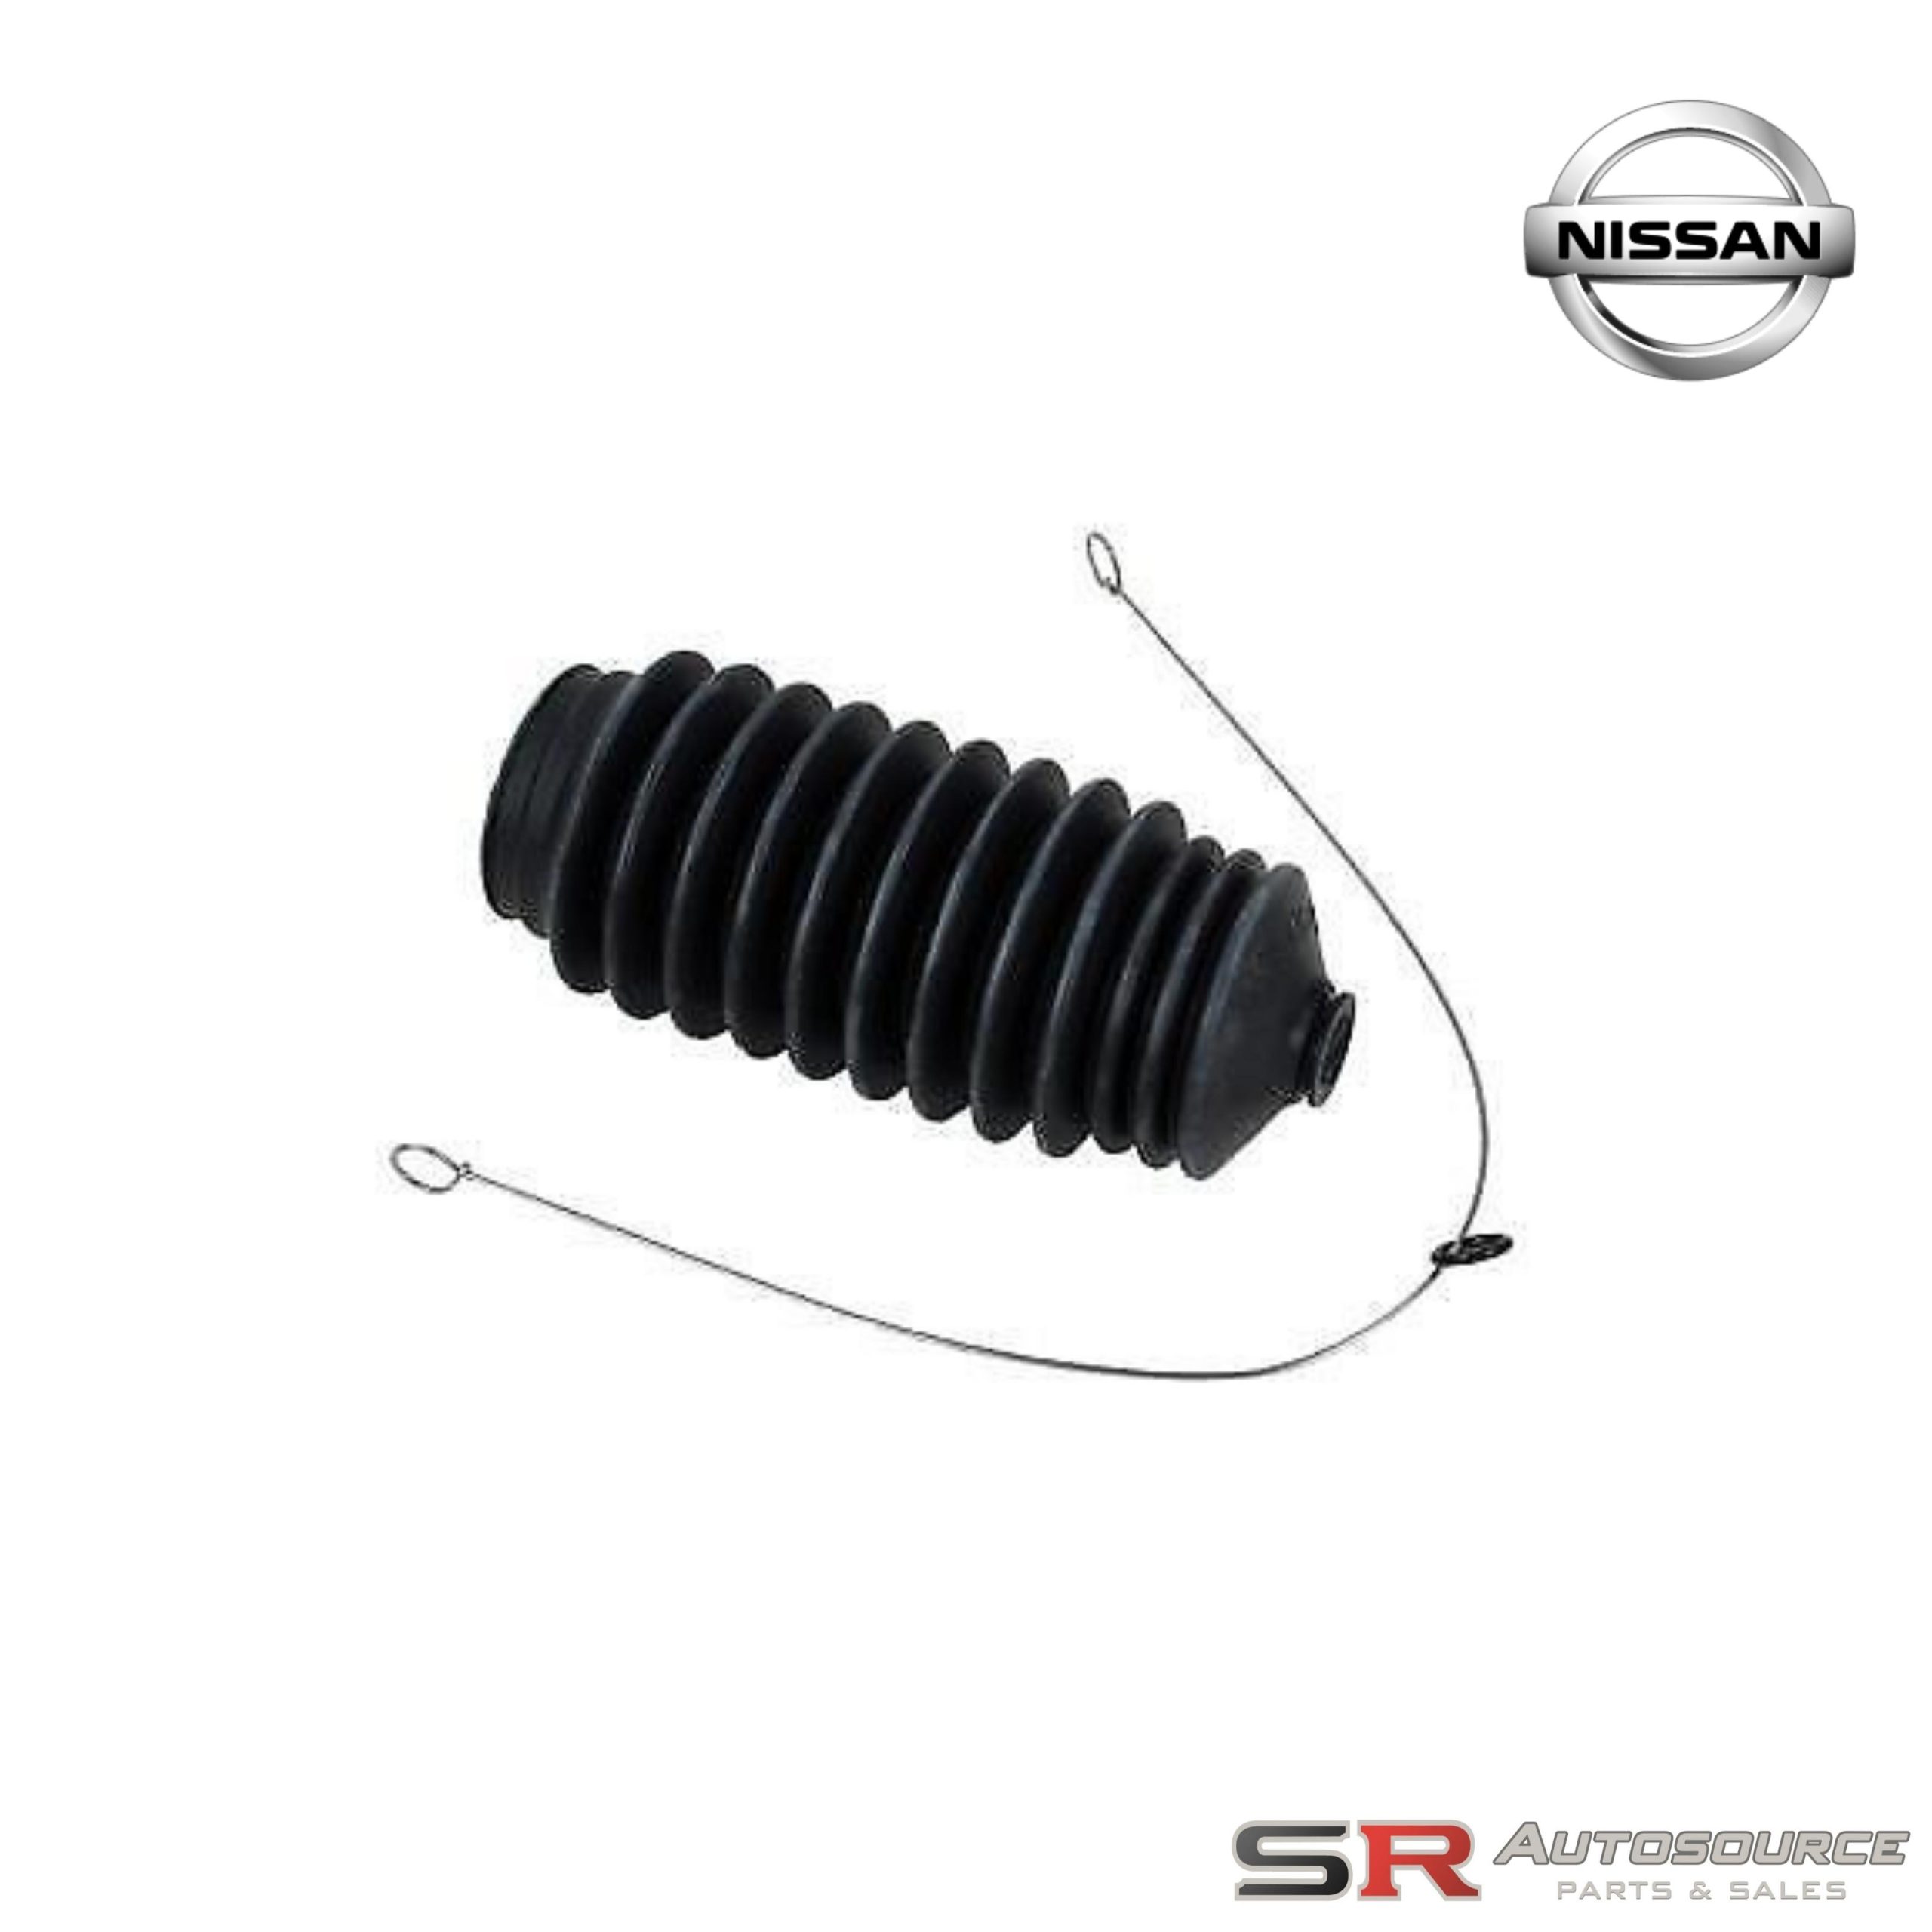 OEM Nissan Power Steering Boot Kits for Silvia and Skyline Models